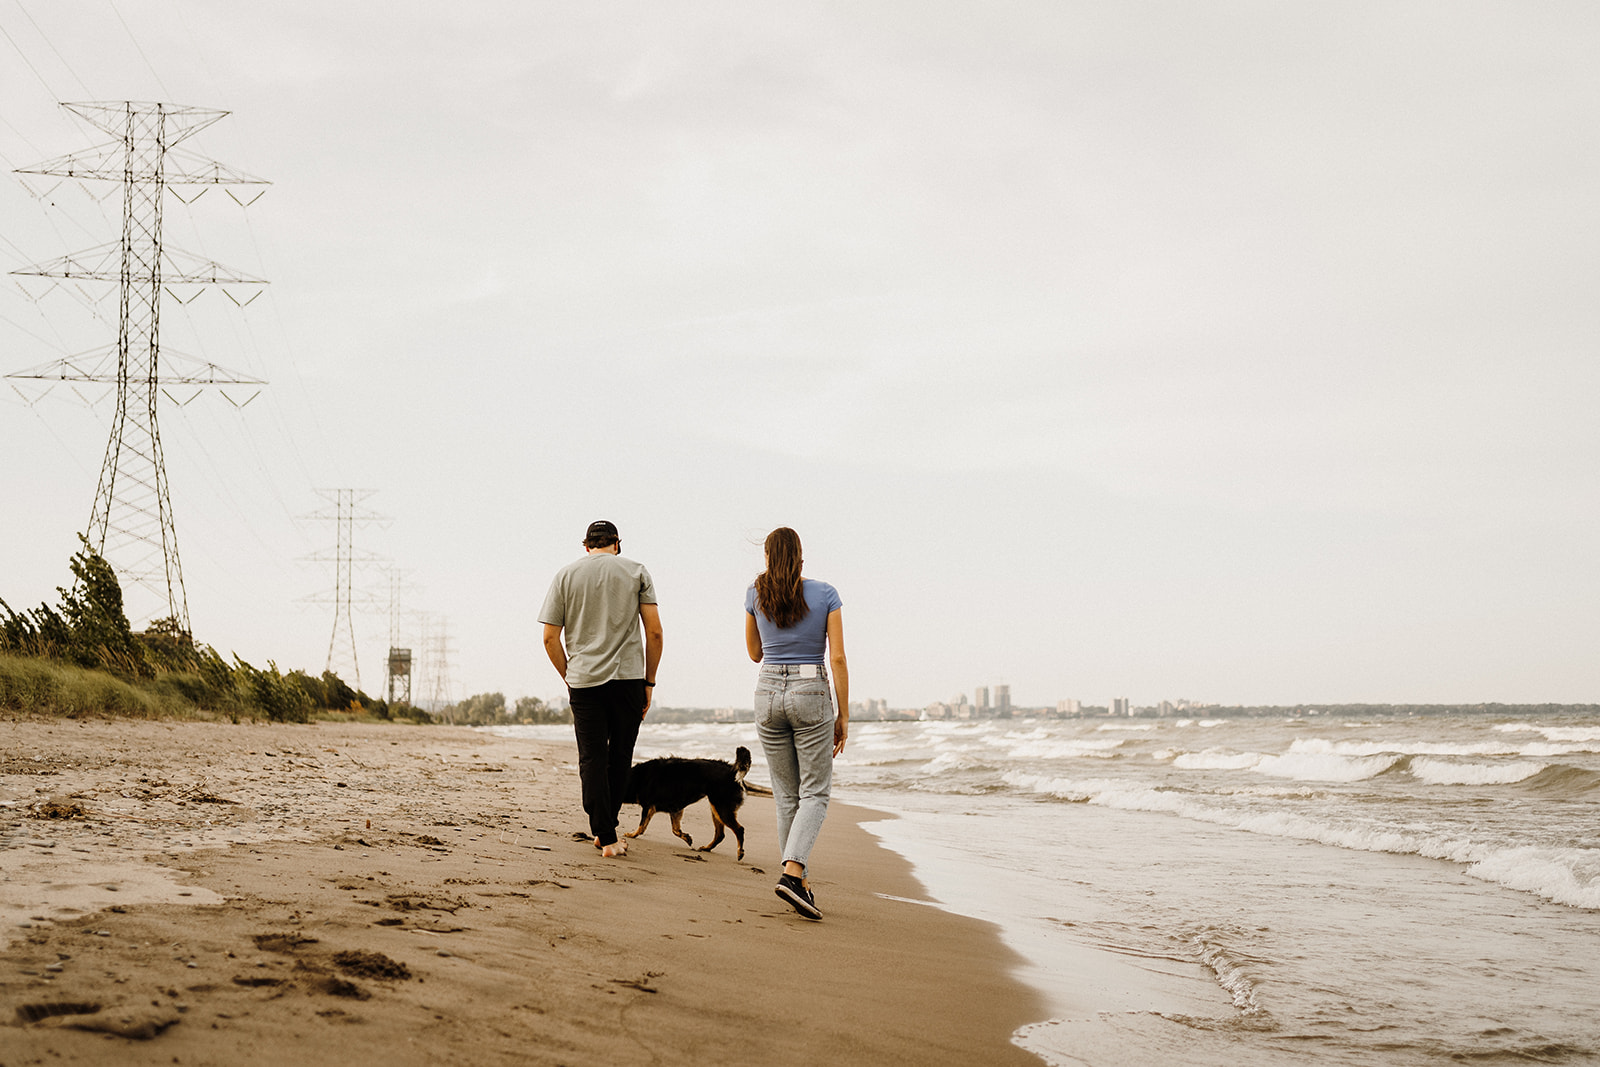 A man and woman walking down the beach together.